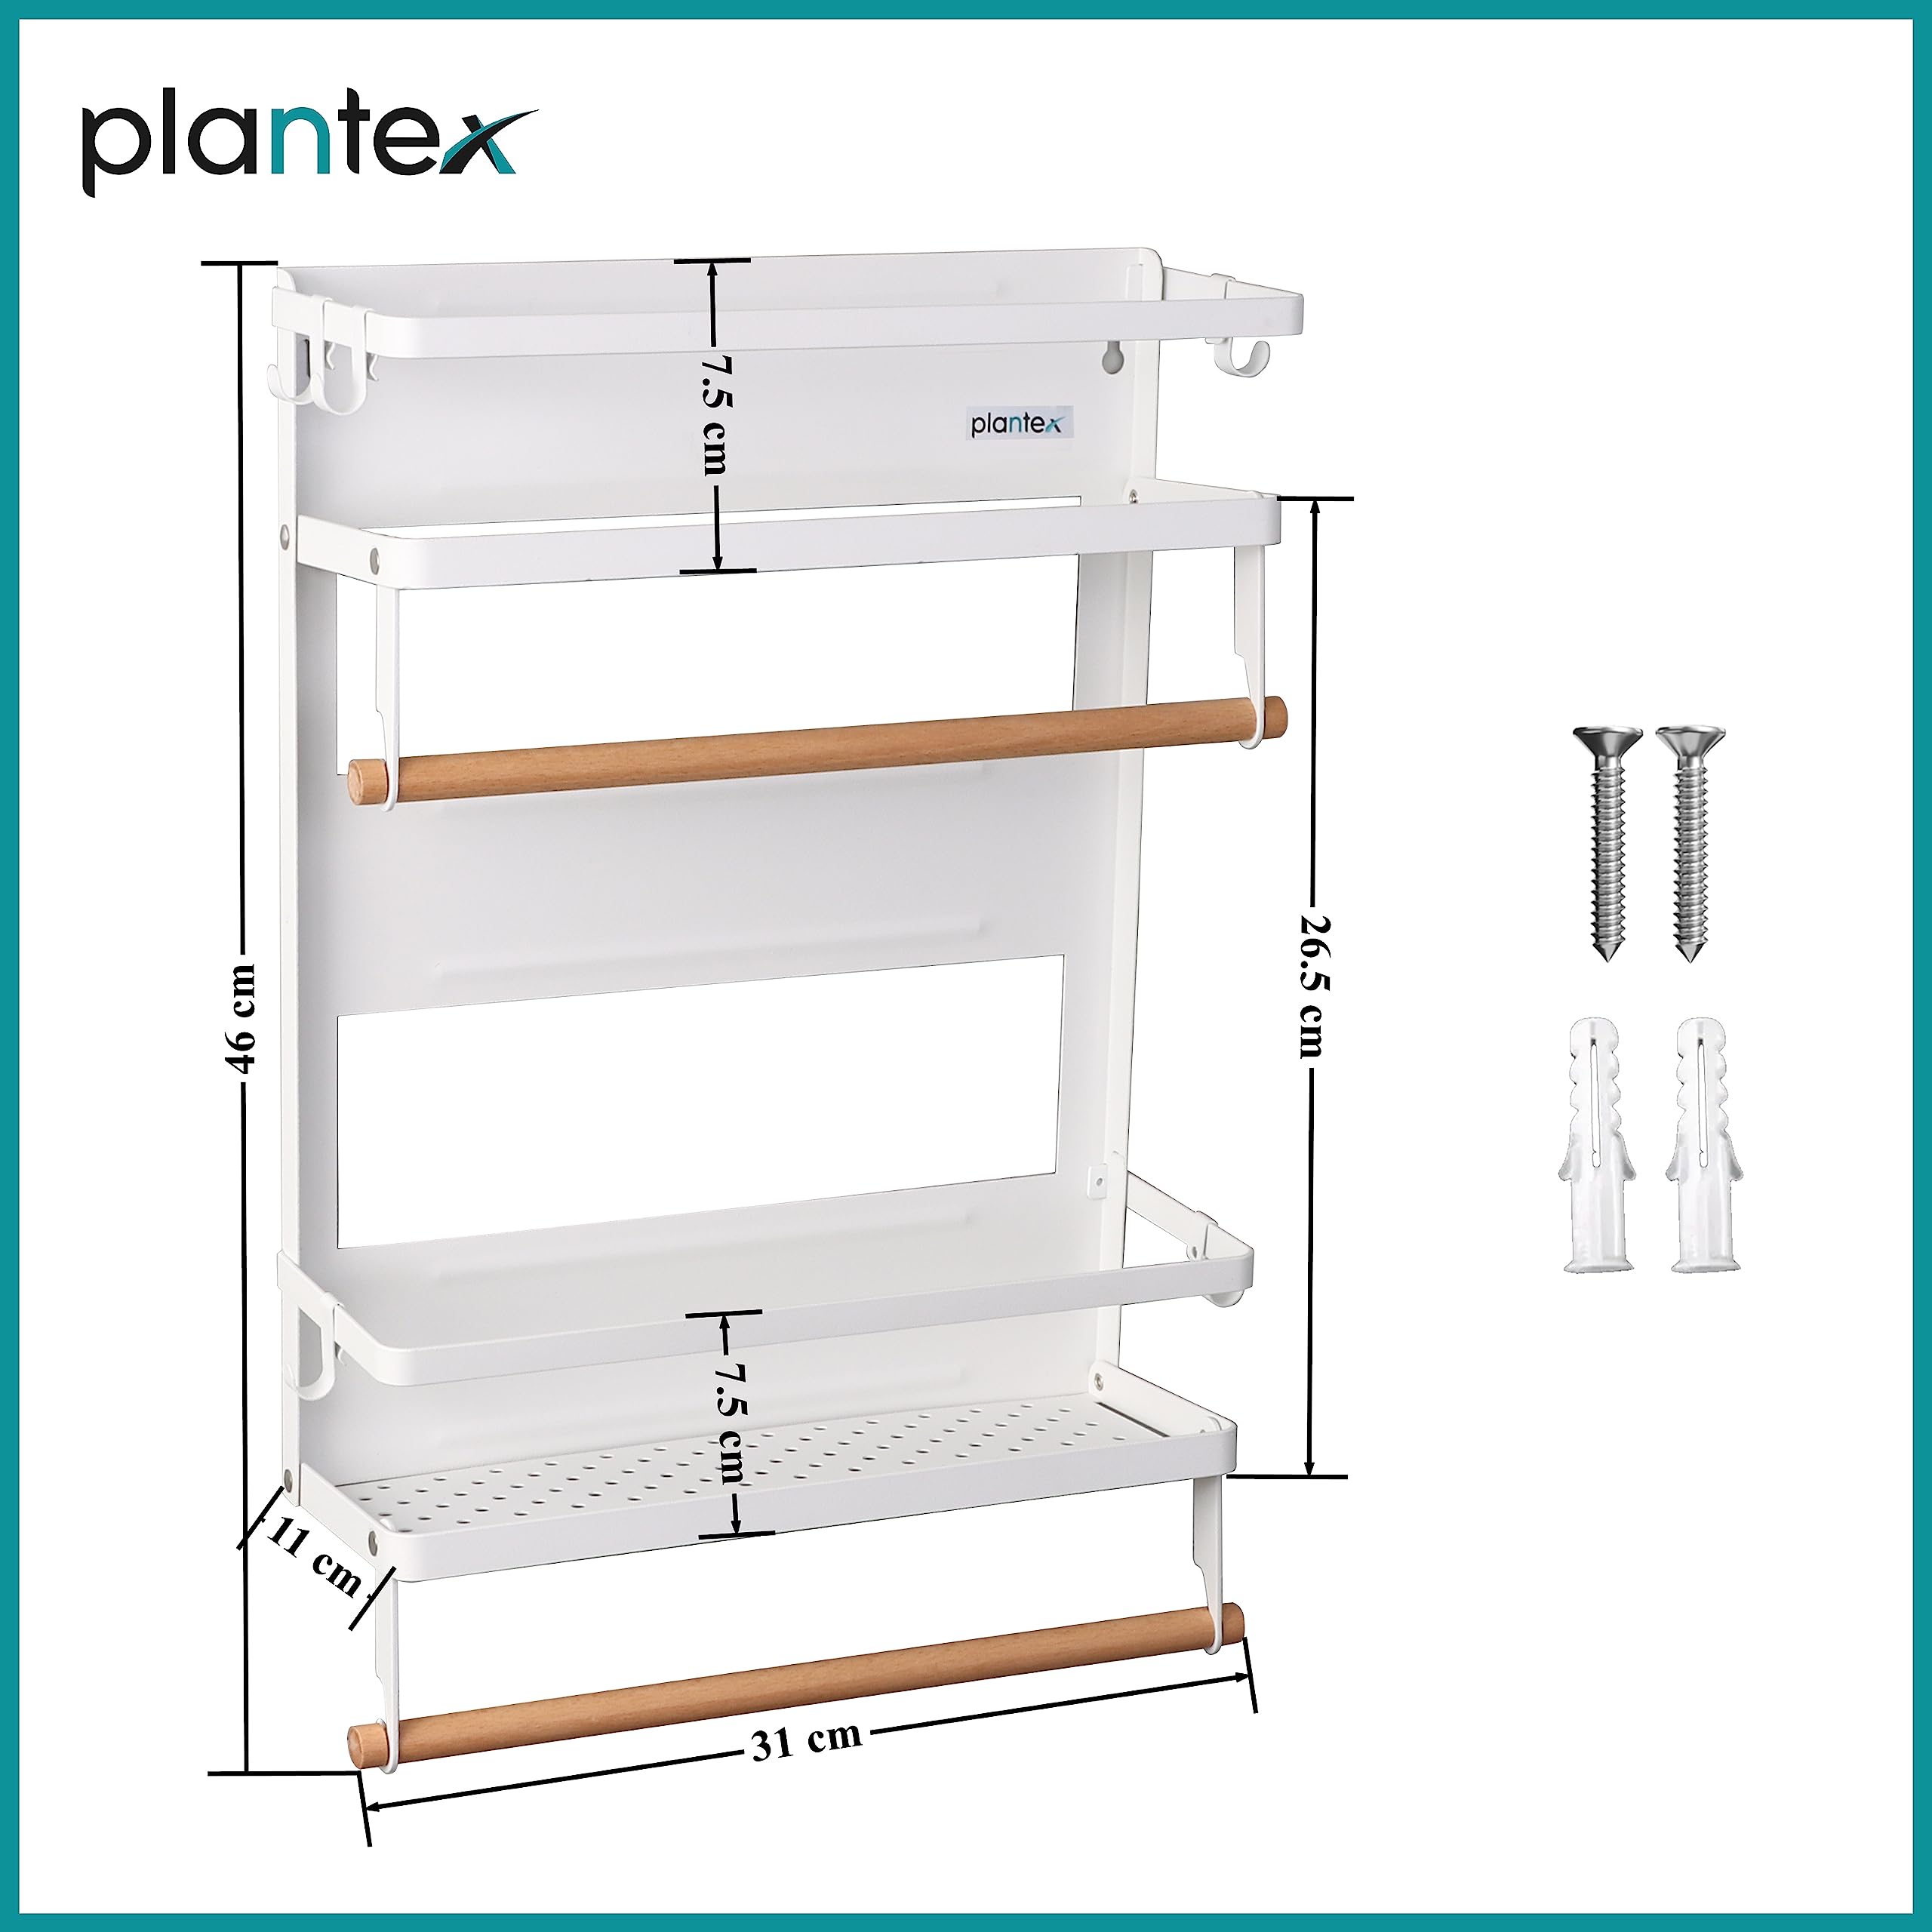 Plantex GI Steel Magnetic Folding Multi-Purpose Shelf for Home/Storage Rack with 2 Movable Hooks and Towel Holder for Bathroom/Bathroom Accessories - Pack of 1 Big-White